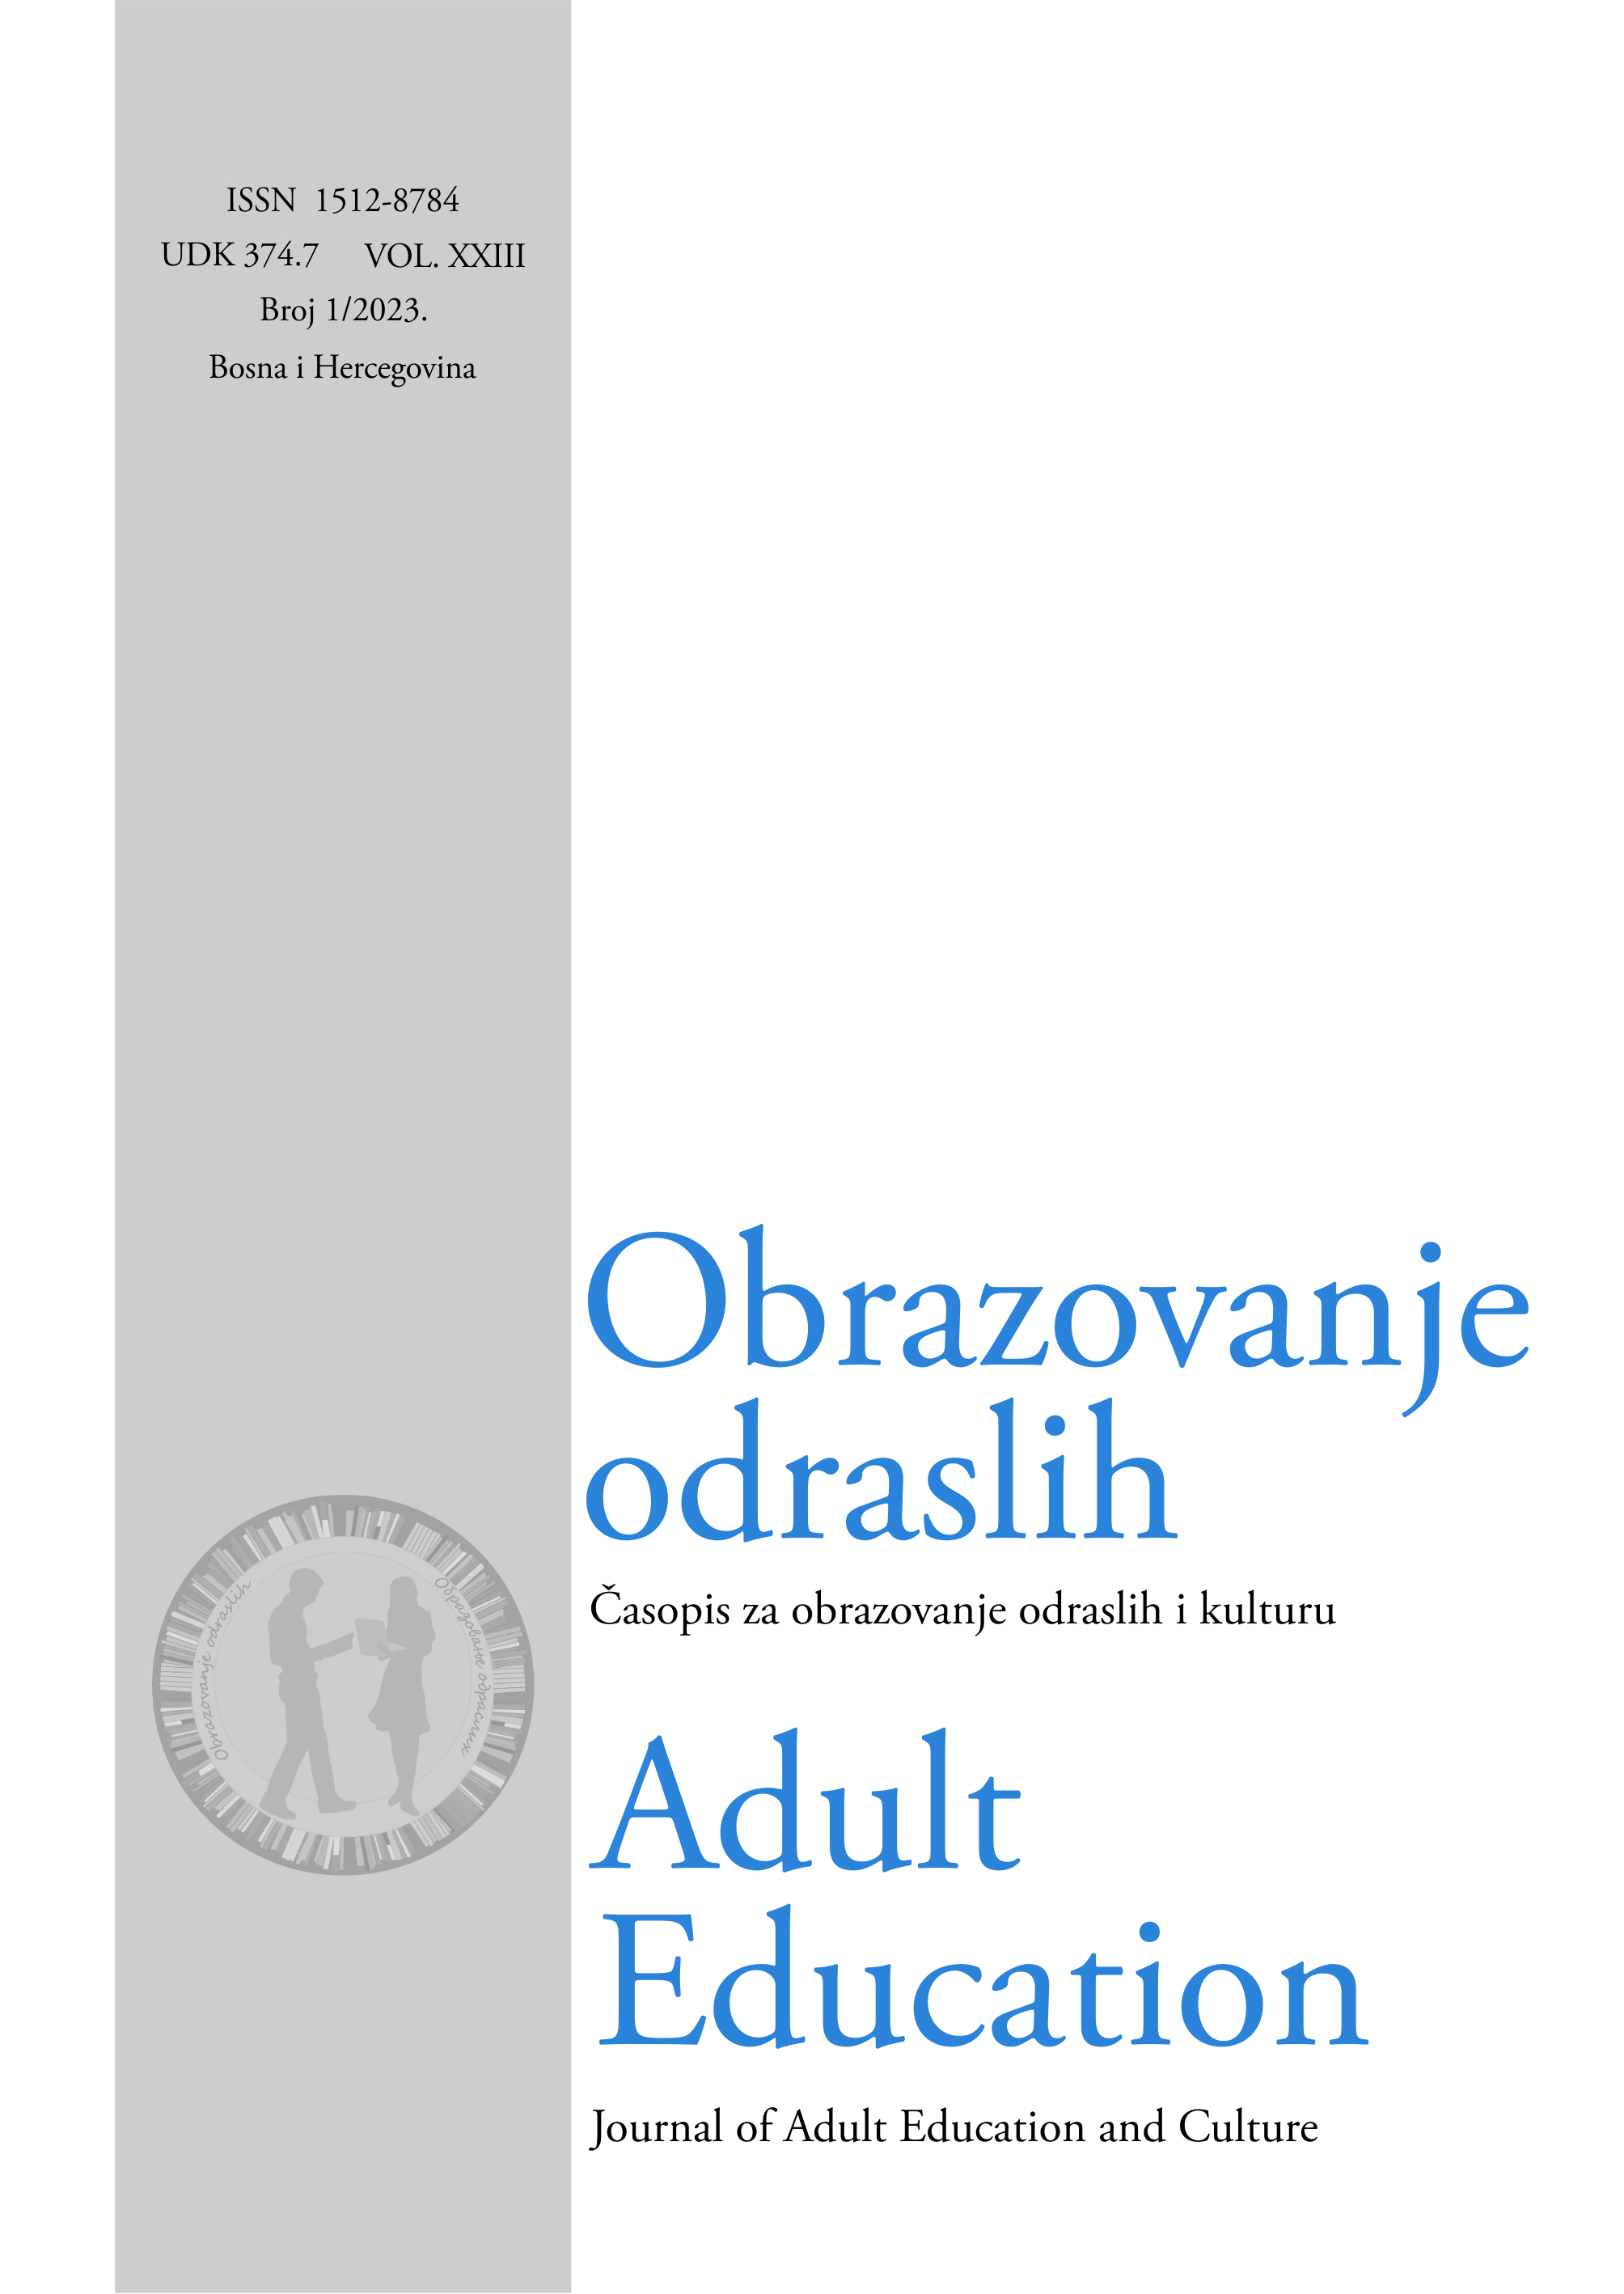 Comparative Analysis of Adult Education System in Bosnia and Herzegovina and Southeast European Countries Cover Image